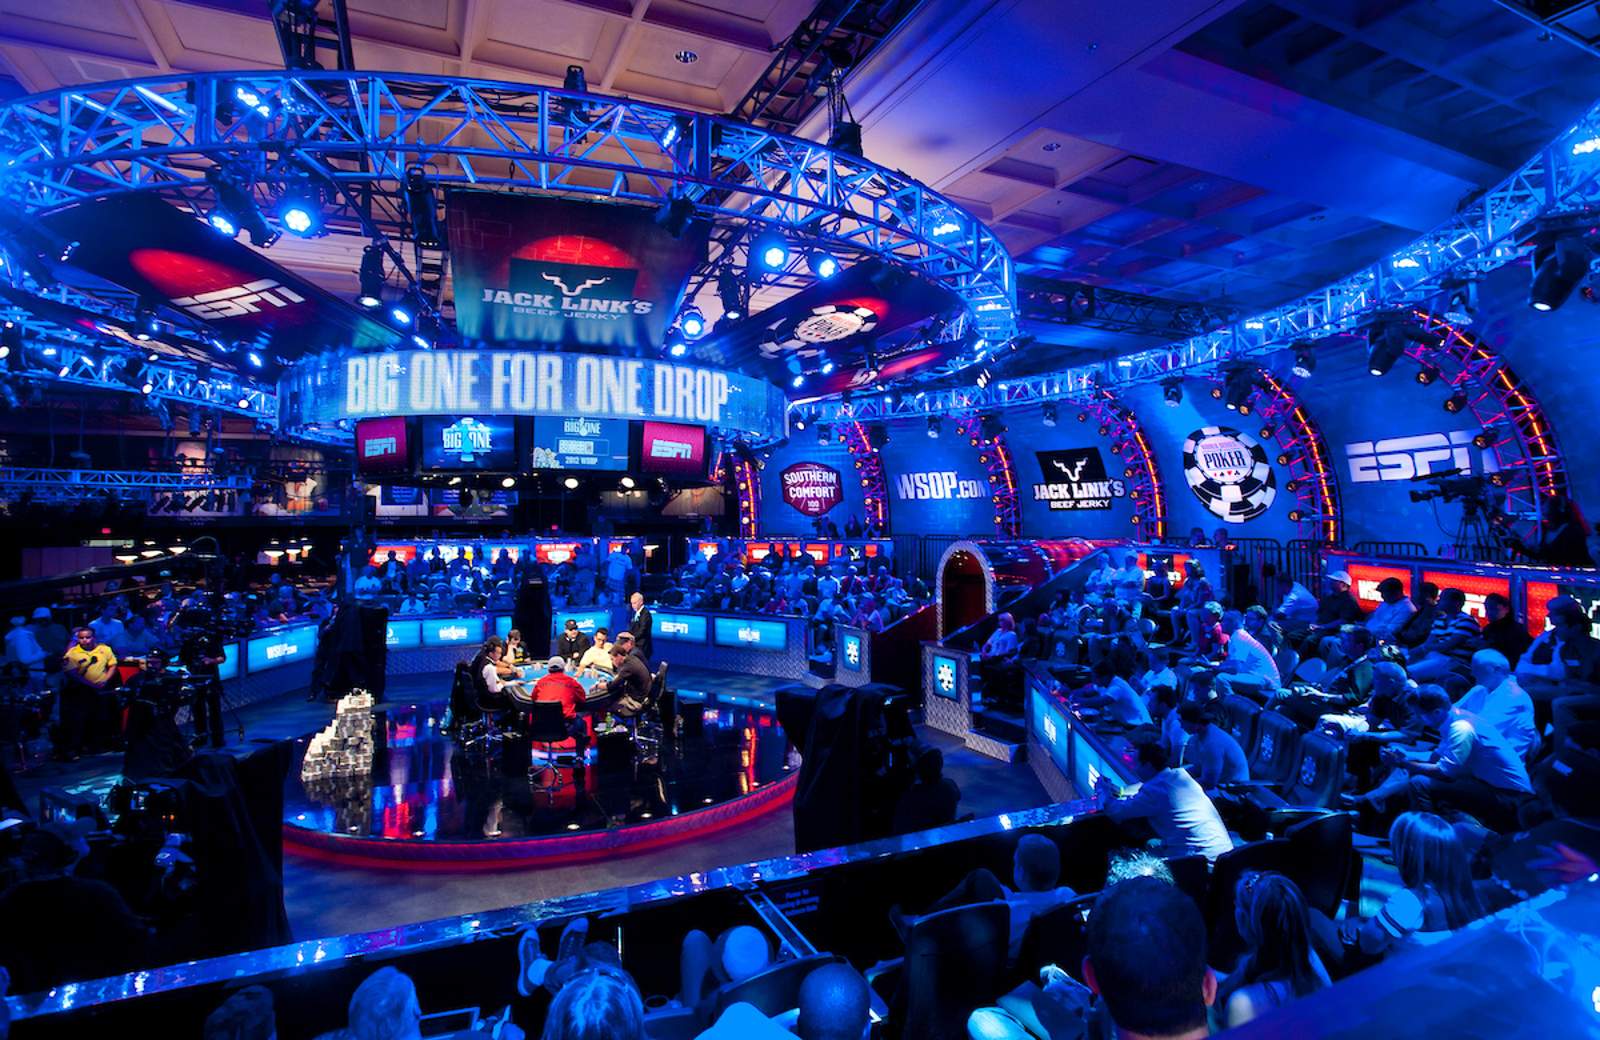 $1,000,000 Big One for One Drop: Where To Watch?